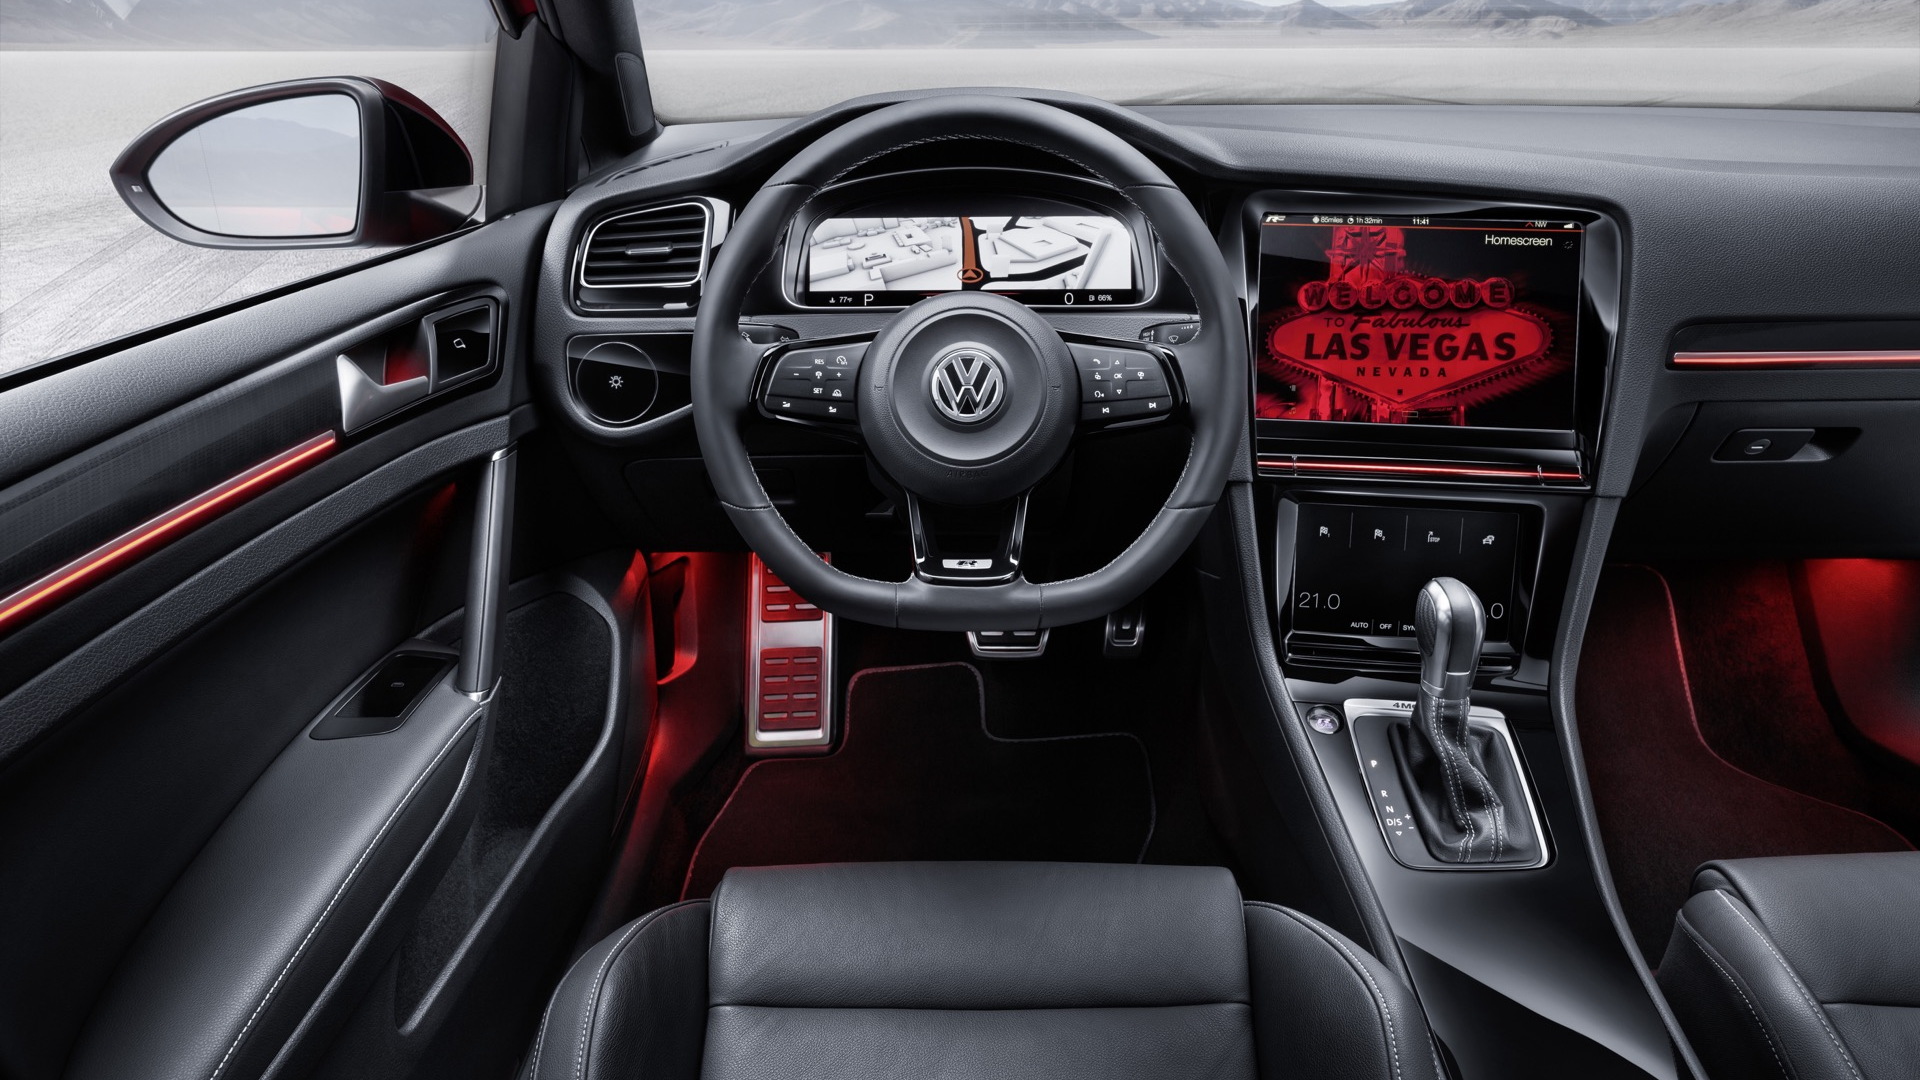 Volkswagen Golf R Touch concept, 2015 Consumer Electronics Show